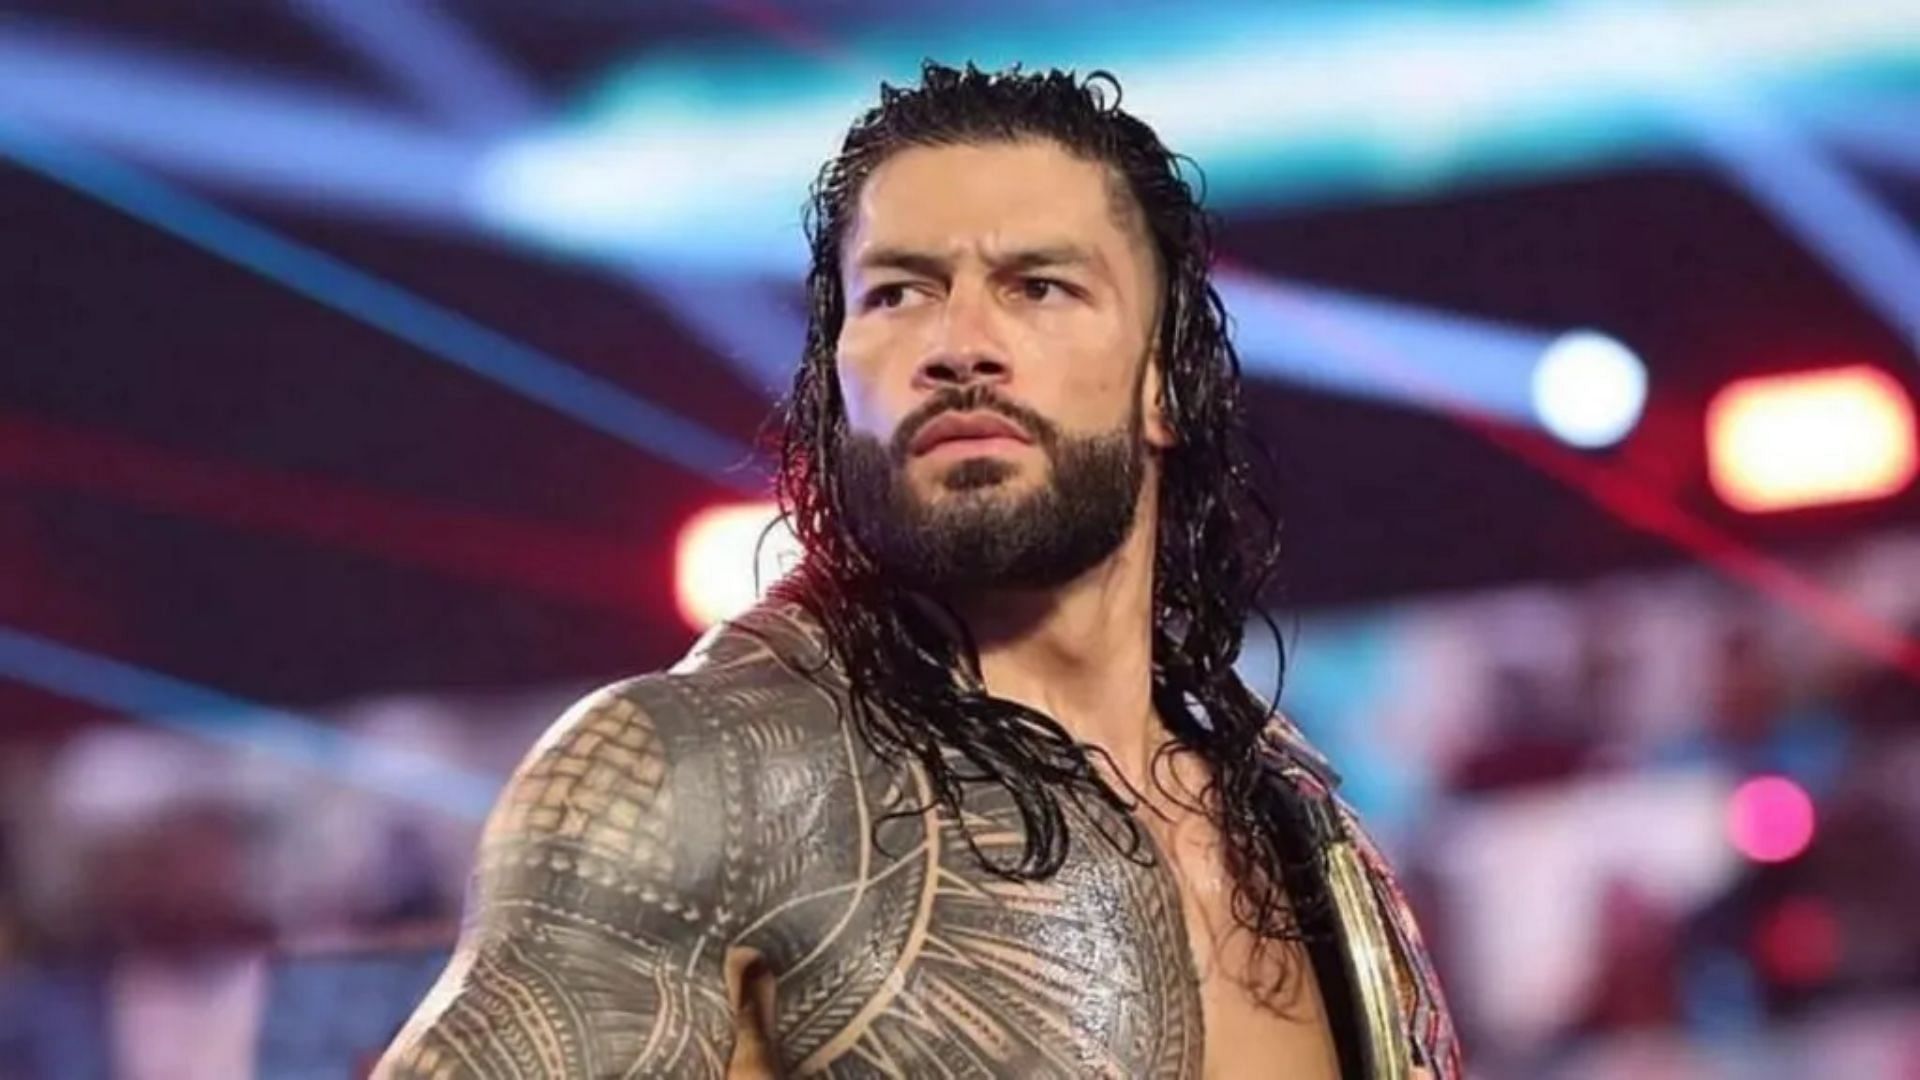 Roman Reigns is popularity personified